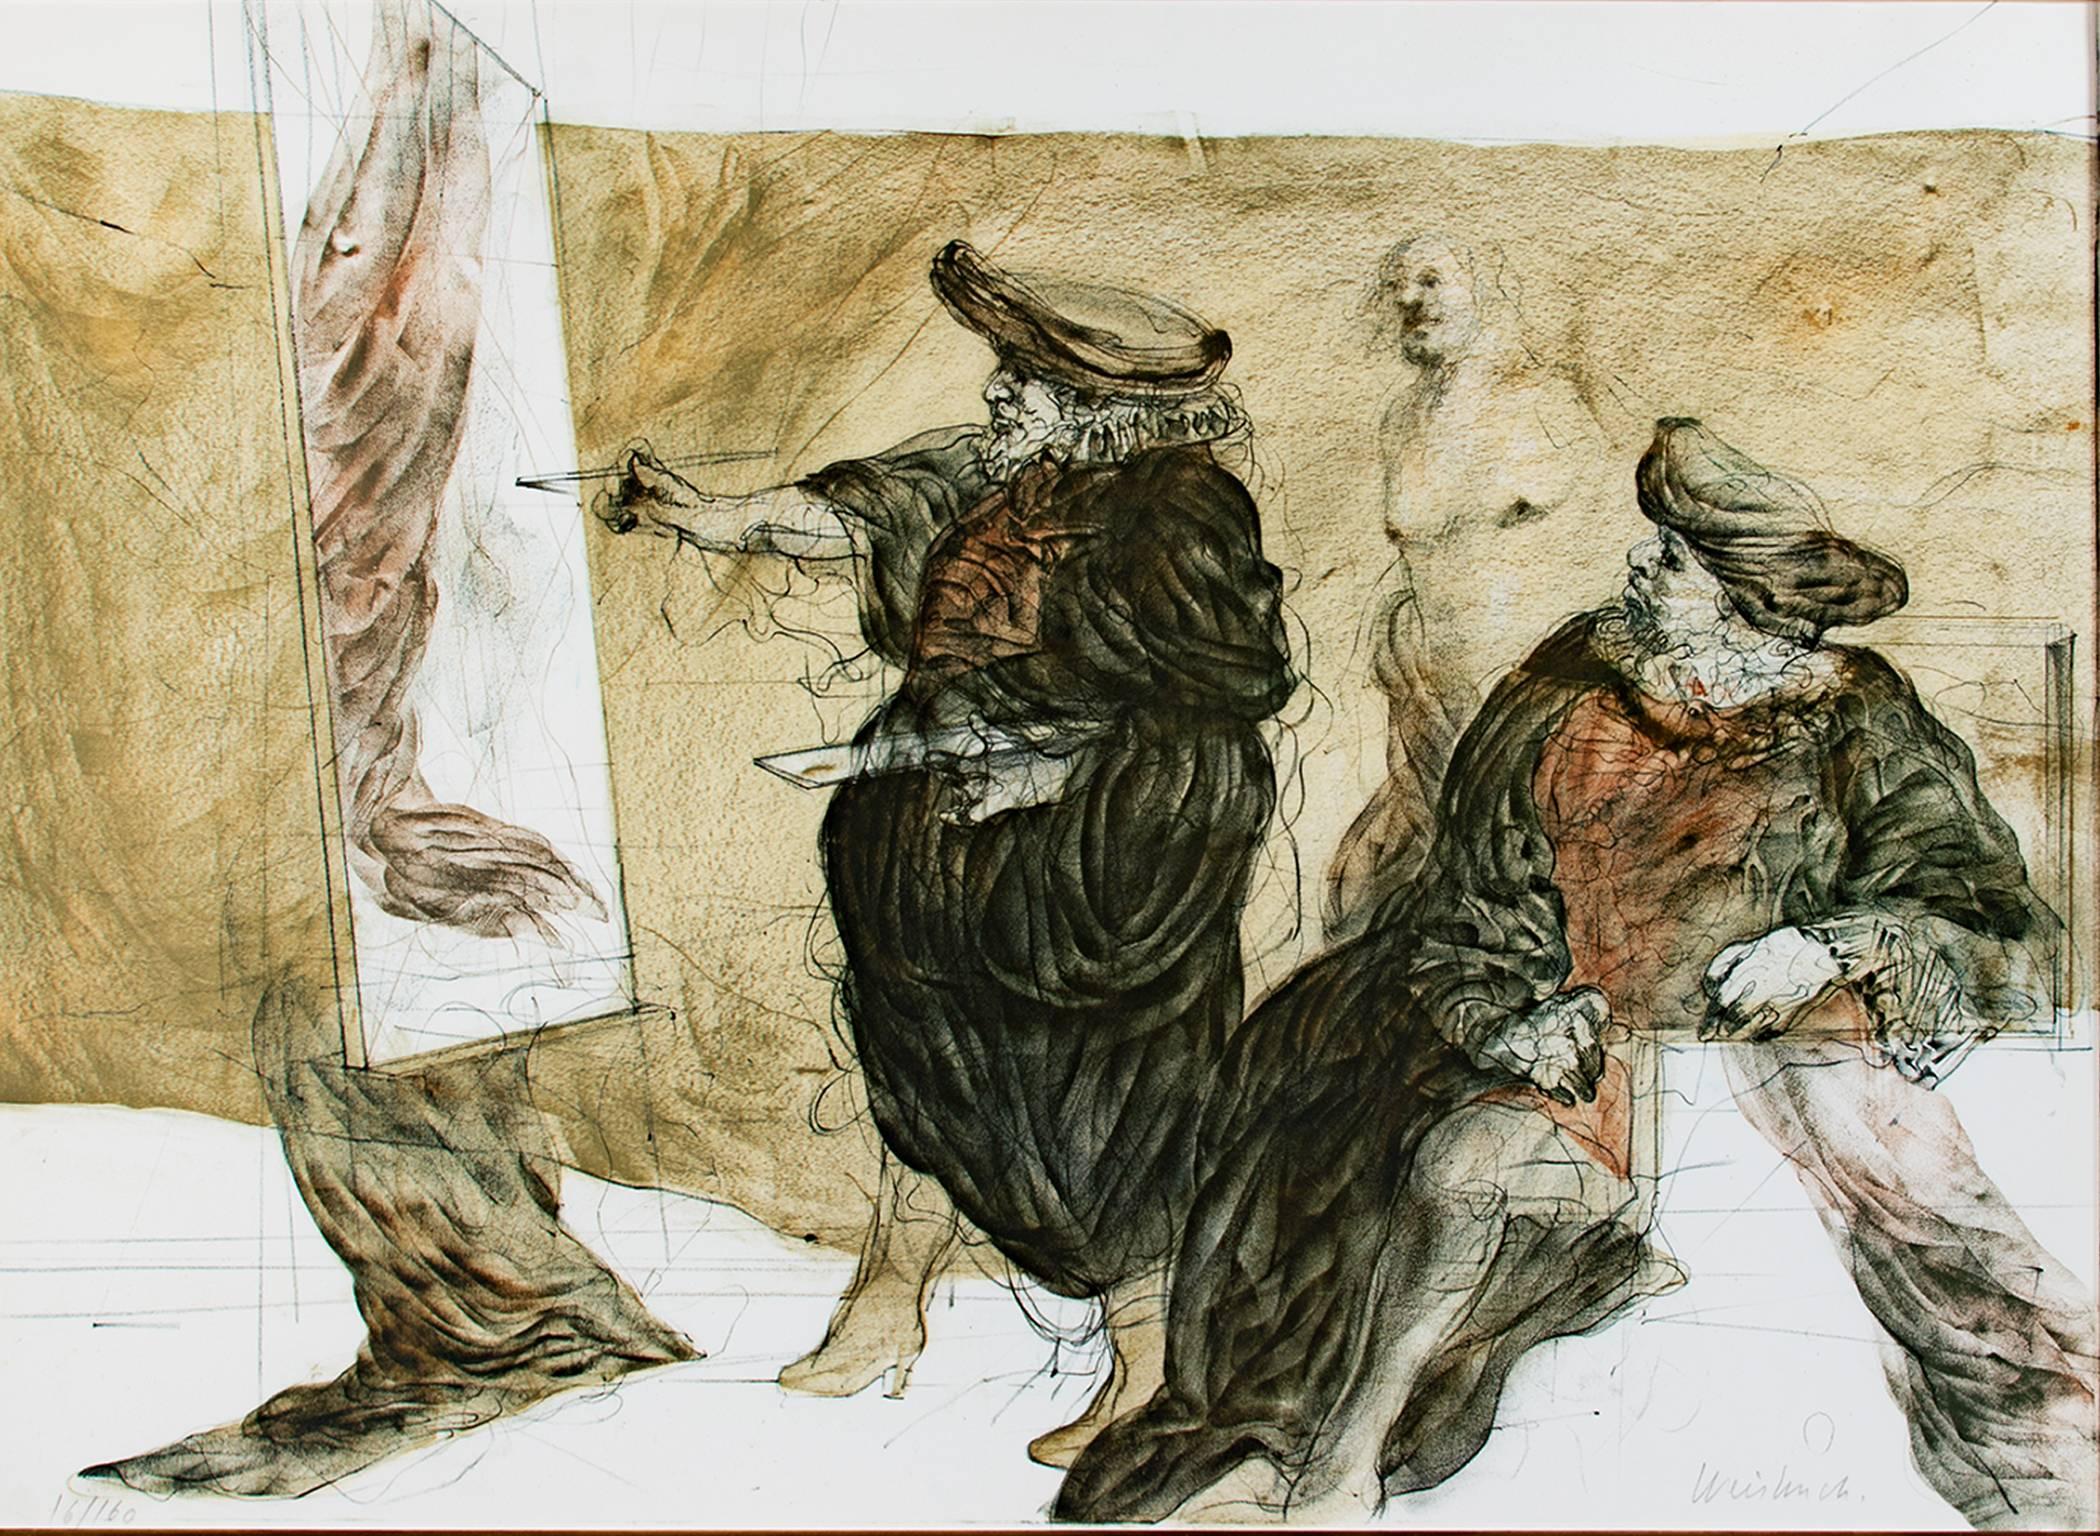 "Geste et Peinture" is an original color lithograph by Claude Weisbuch. The artist signed the piece in the lower right and wrote the edition number (16/160) in the lower left. This piece depicts an artist at his easel painting fabric while another